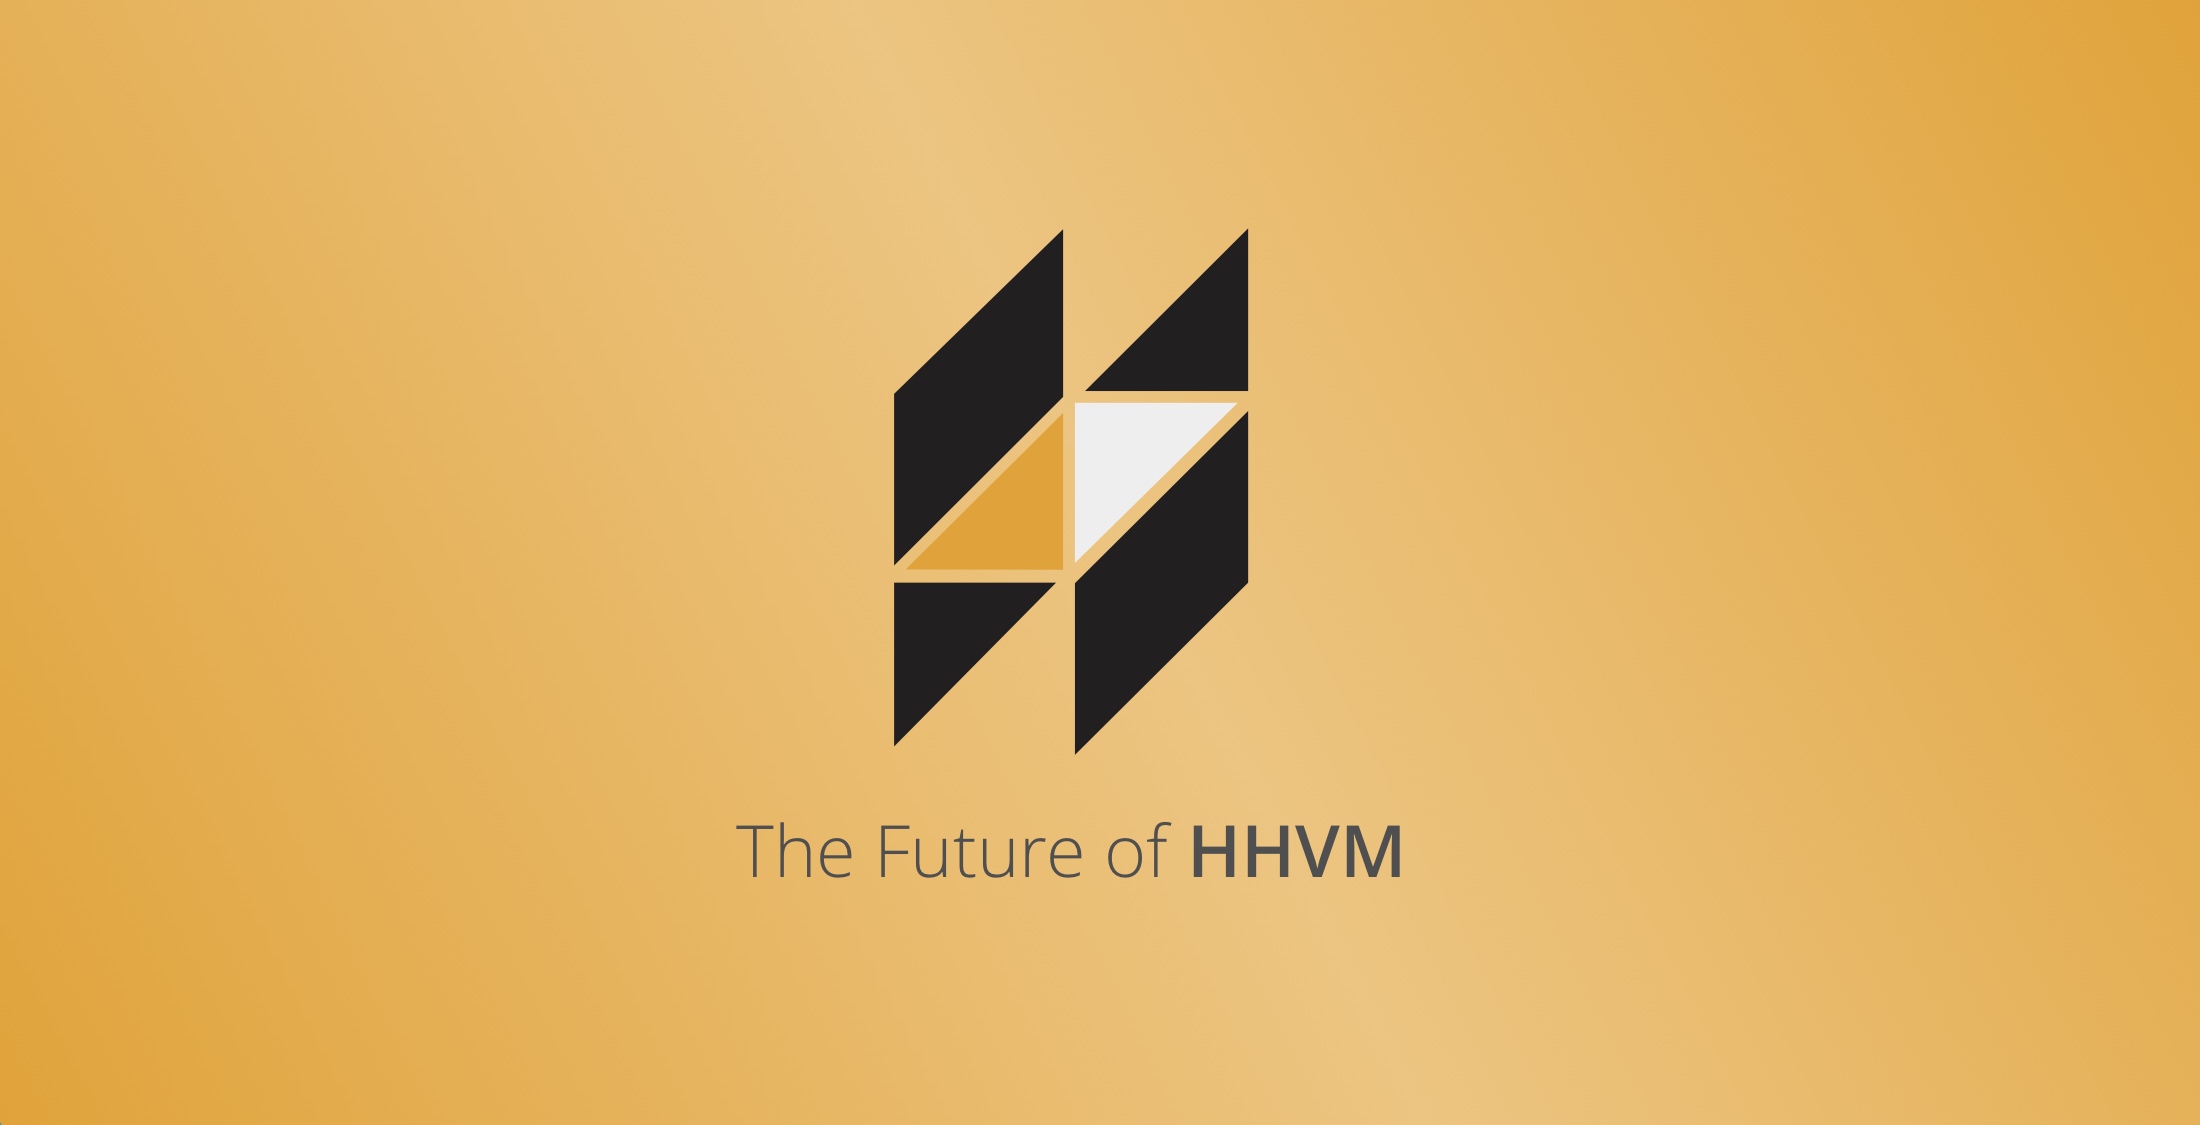 The Future of HHVM and Hack image